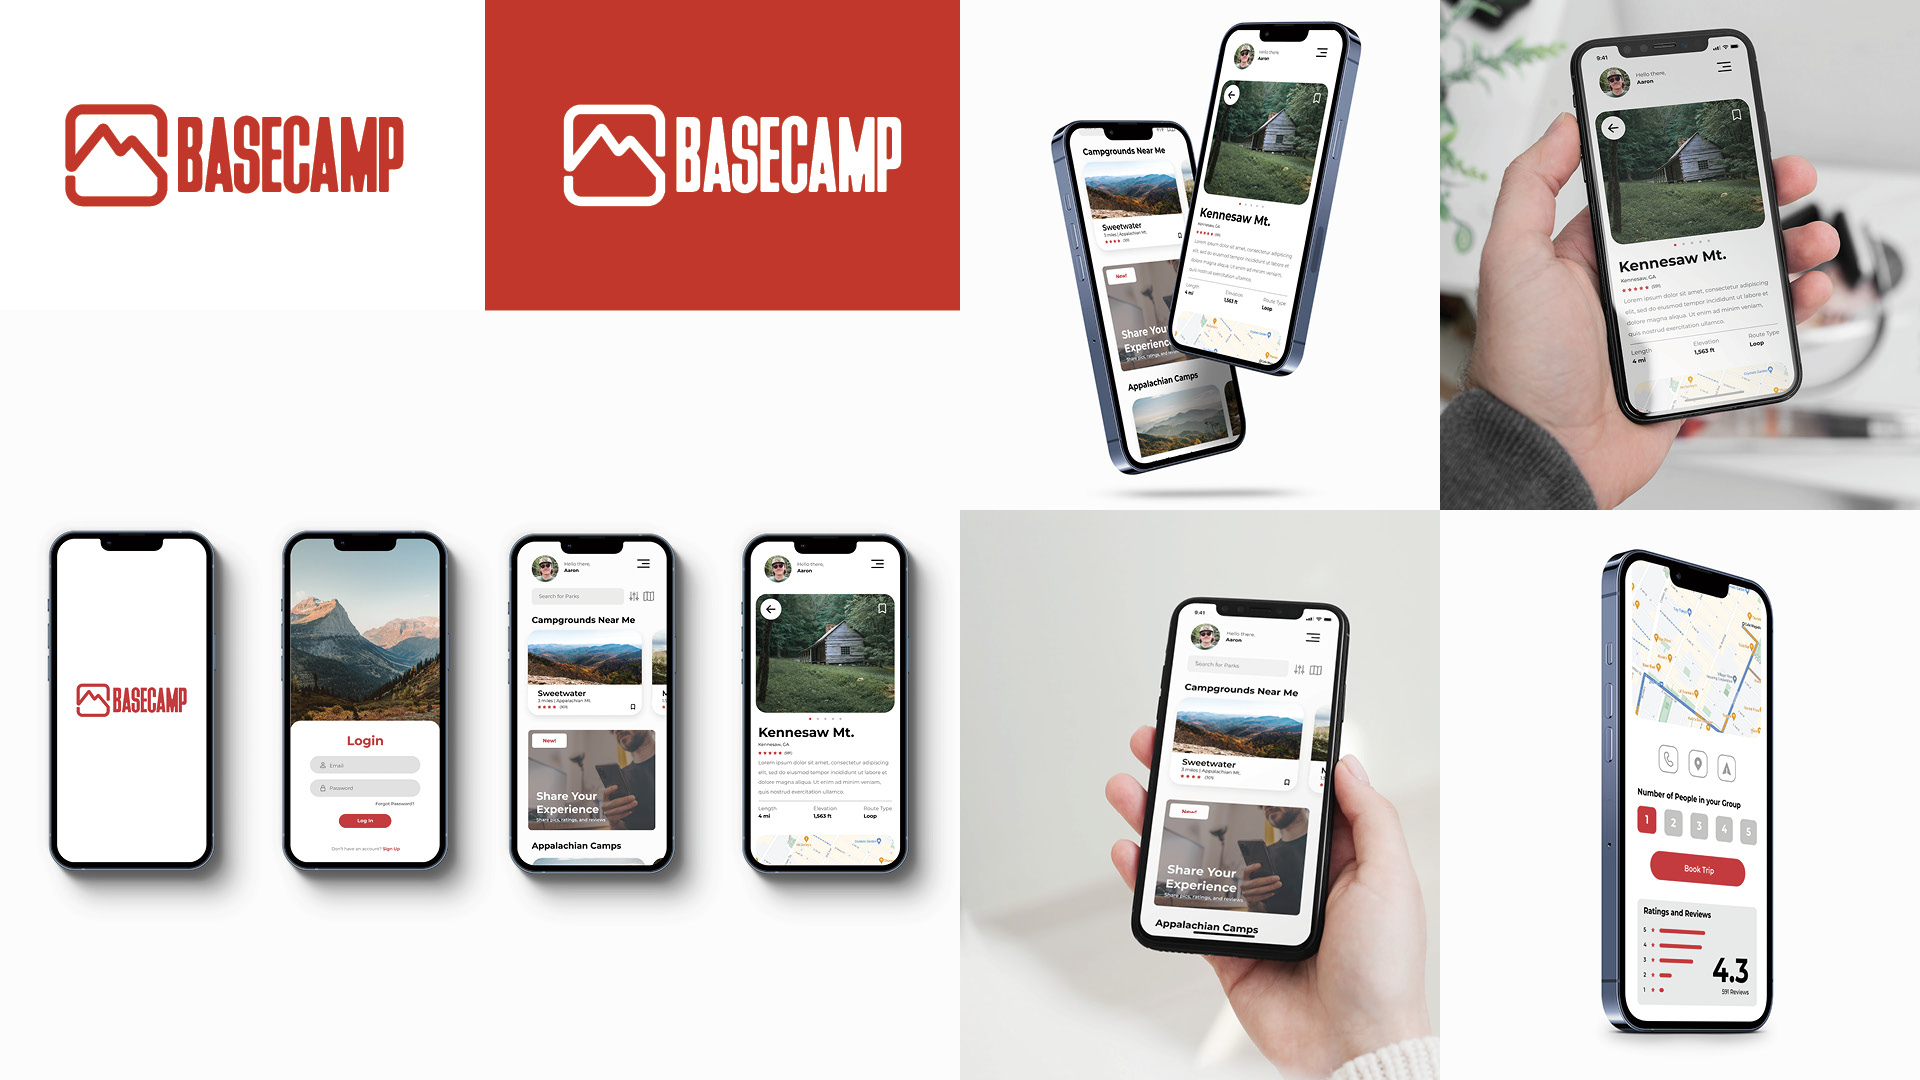  / “Basecamp,” UX/UI, 2021. An app that helps outdoorsy people find hiking trails and camping sites in their local area. 